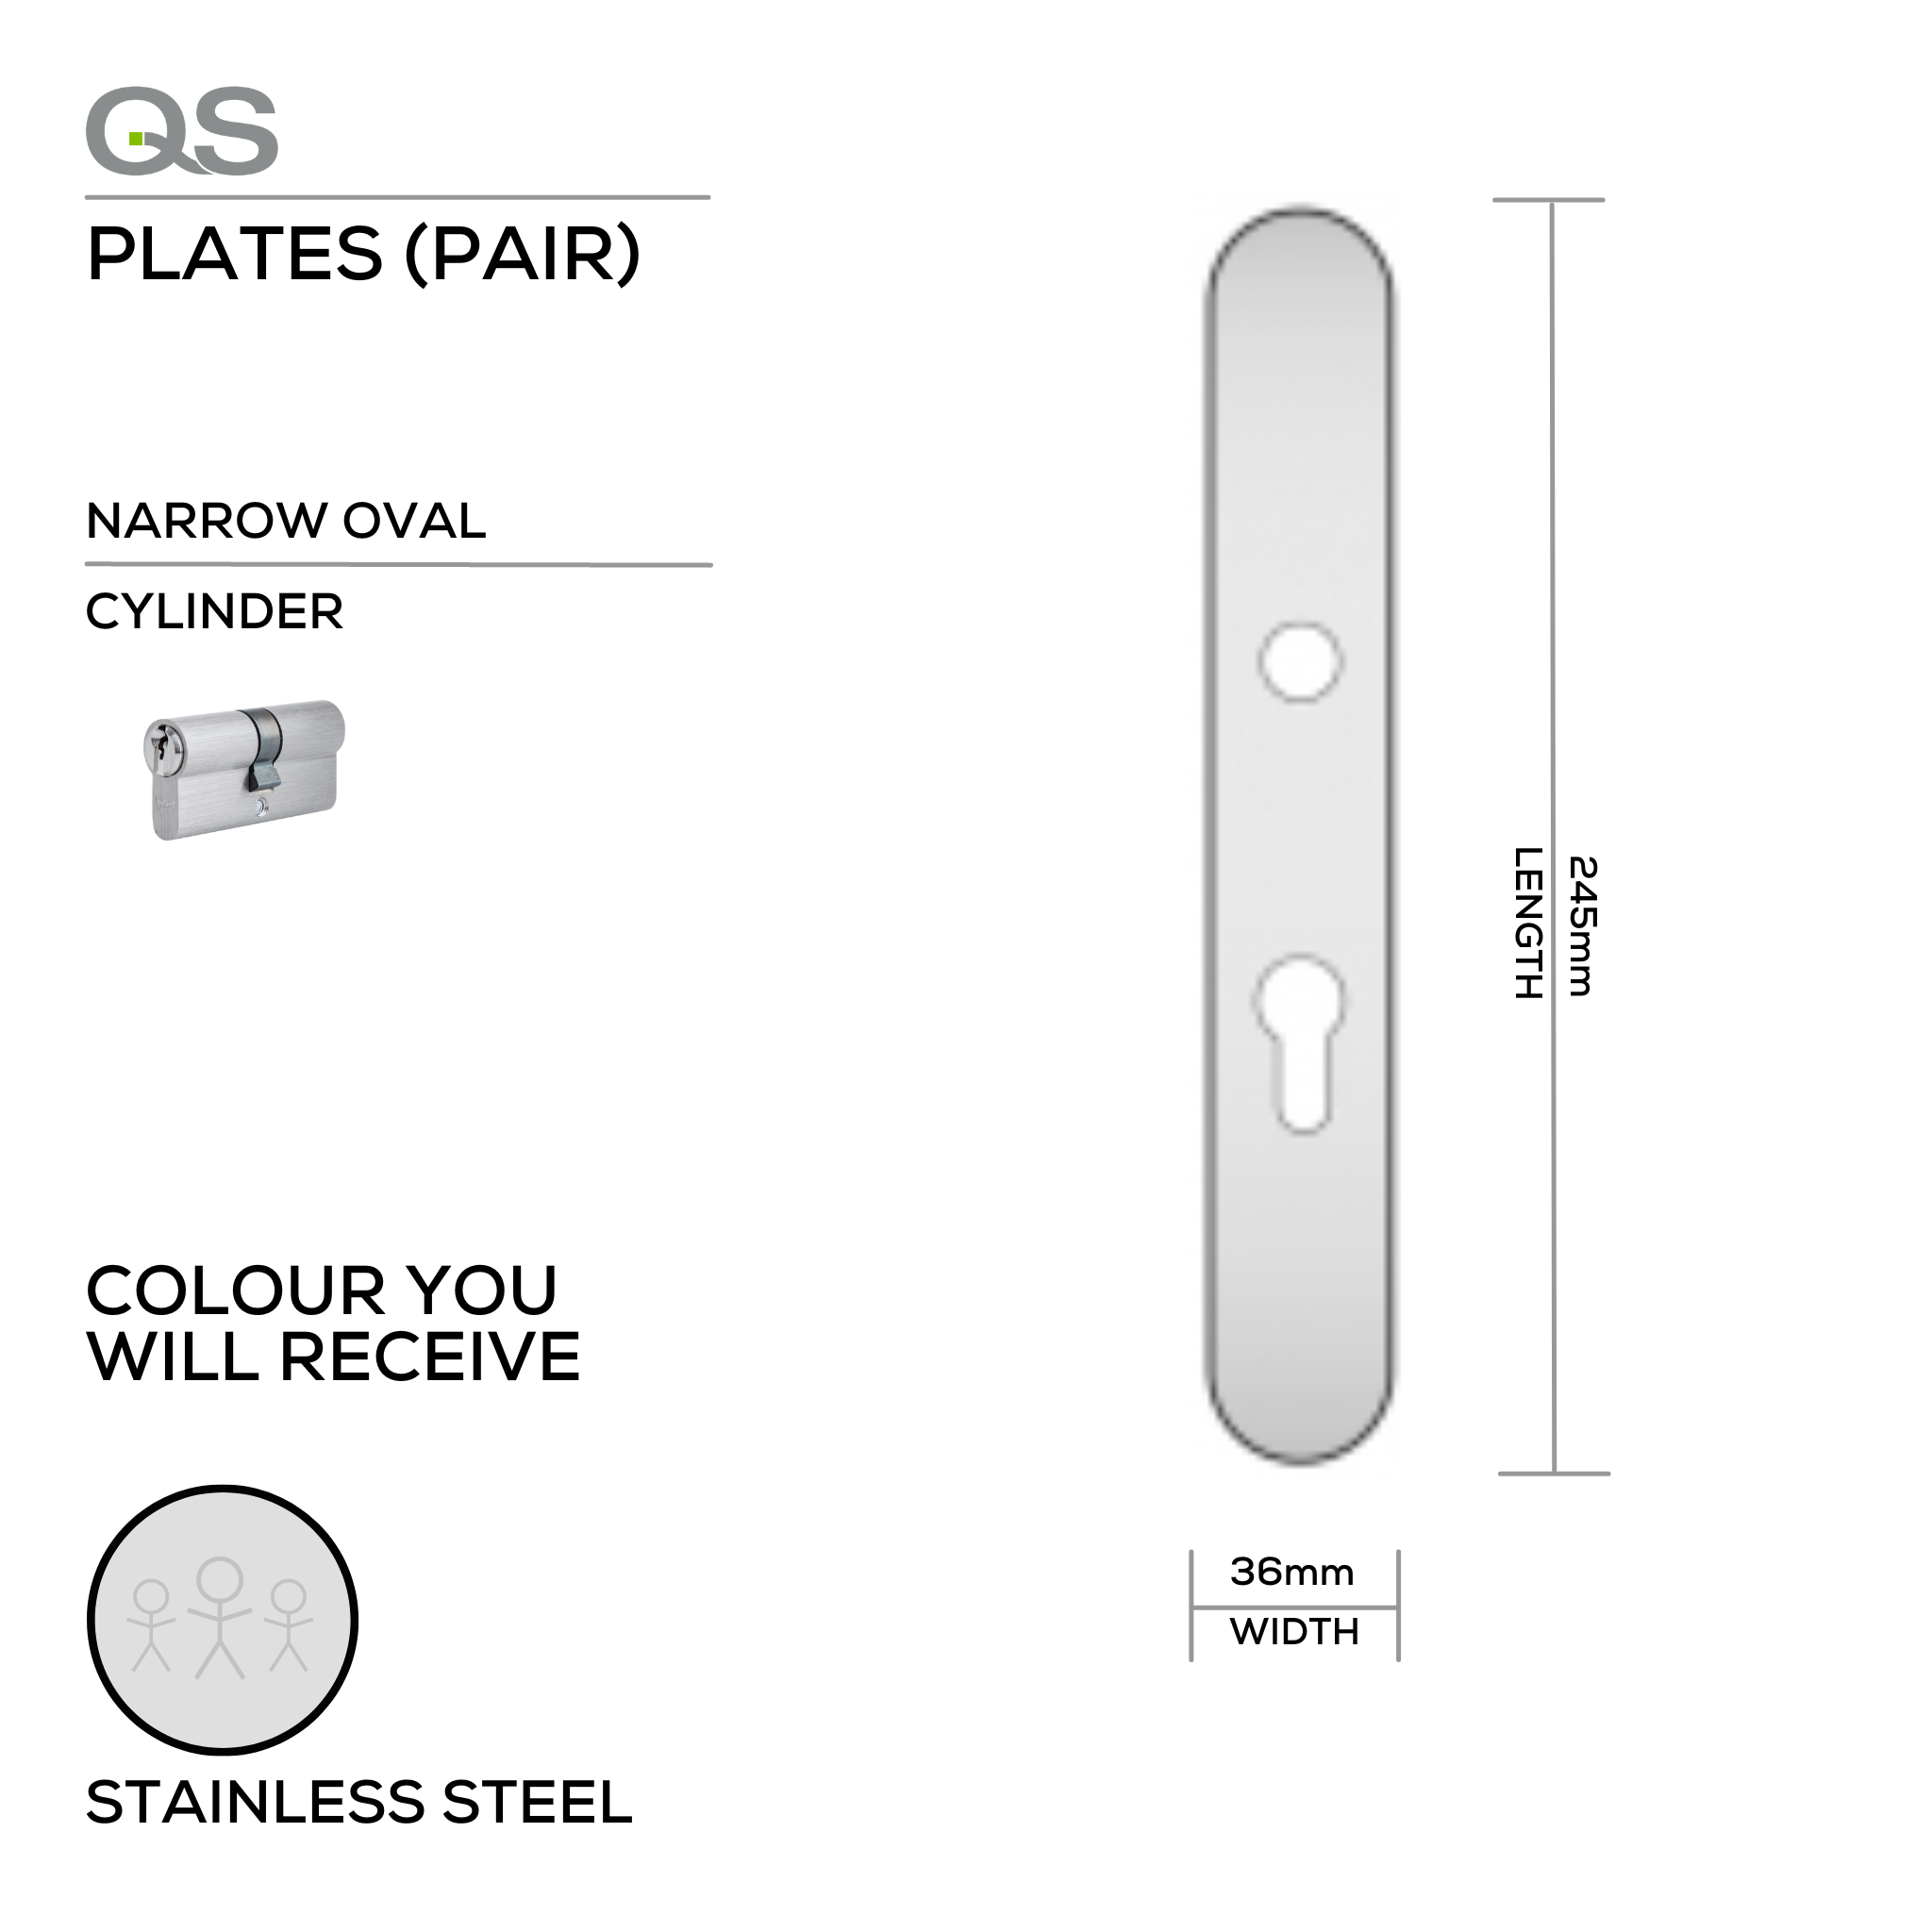 QS4483 CYL, Plate, Narrow Oval, 245mm (l) x 36mm (w), Supplied with QS Handle, Stainless Steel, QS